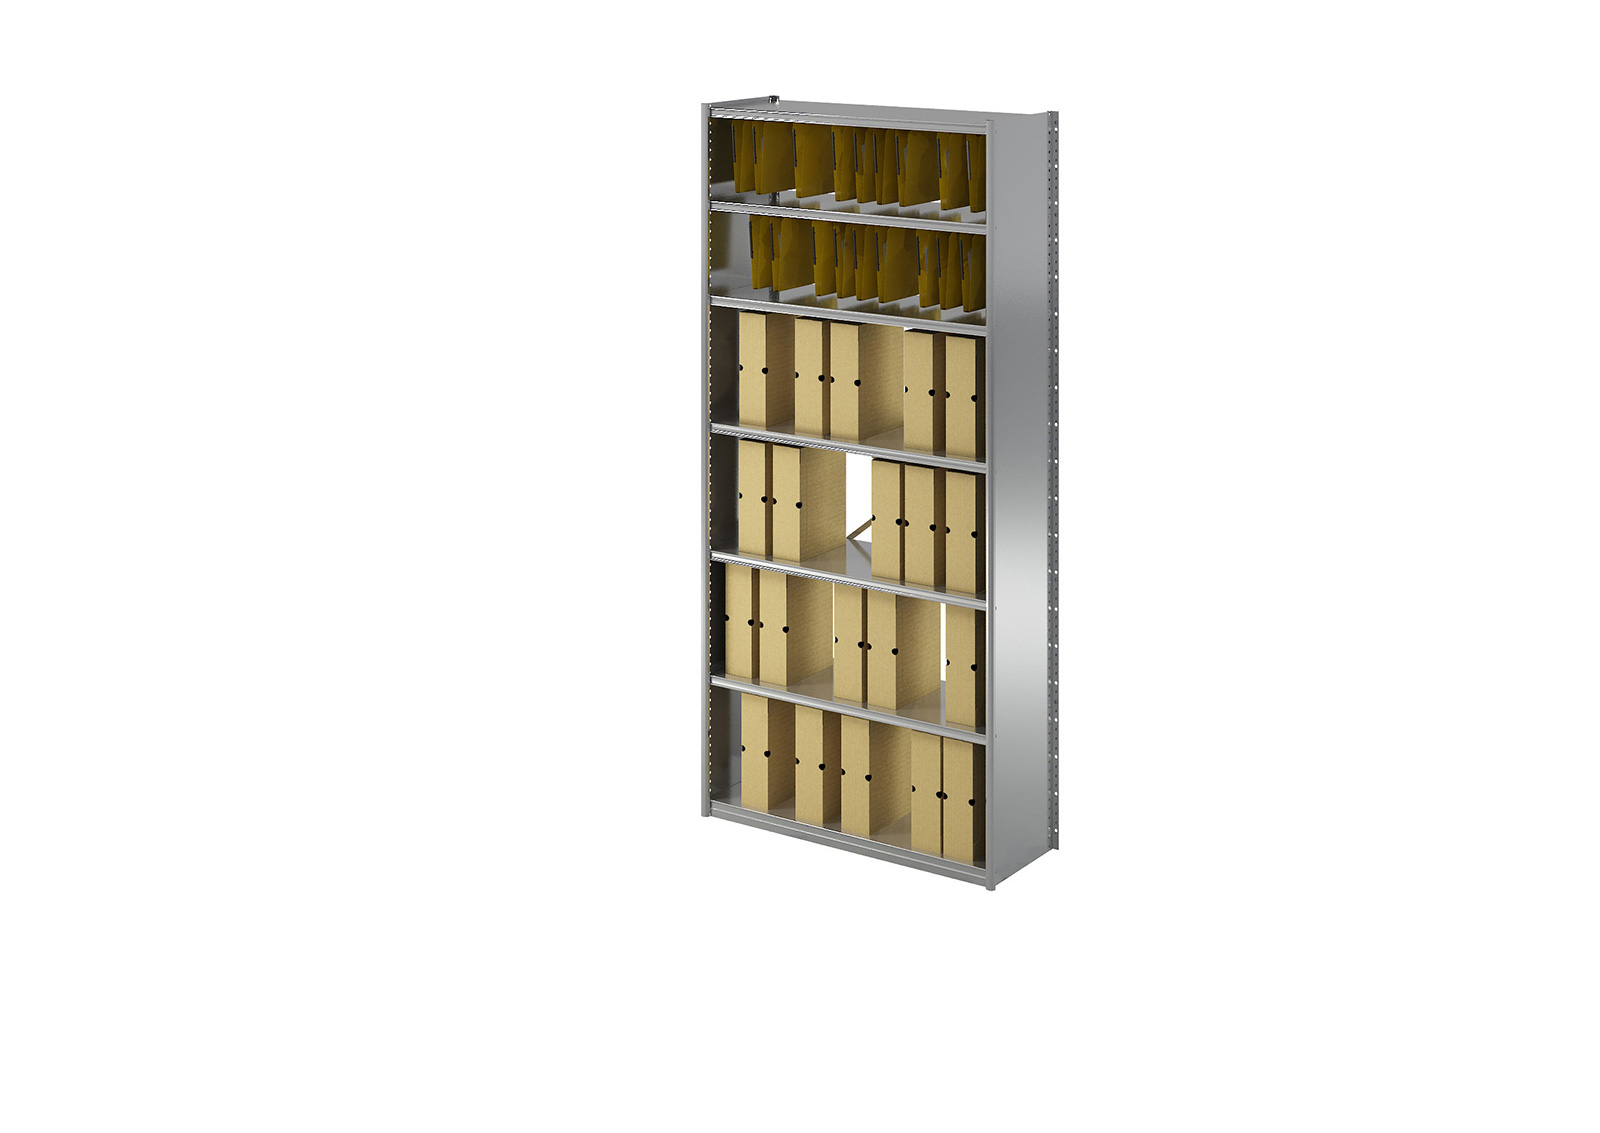 Metal shelving for archiving